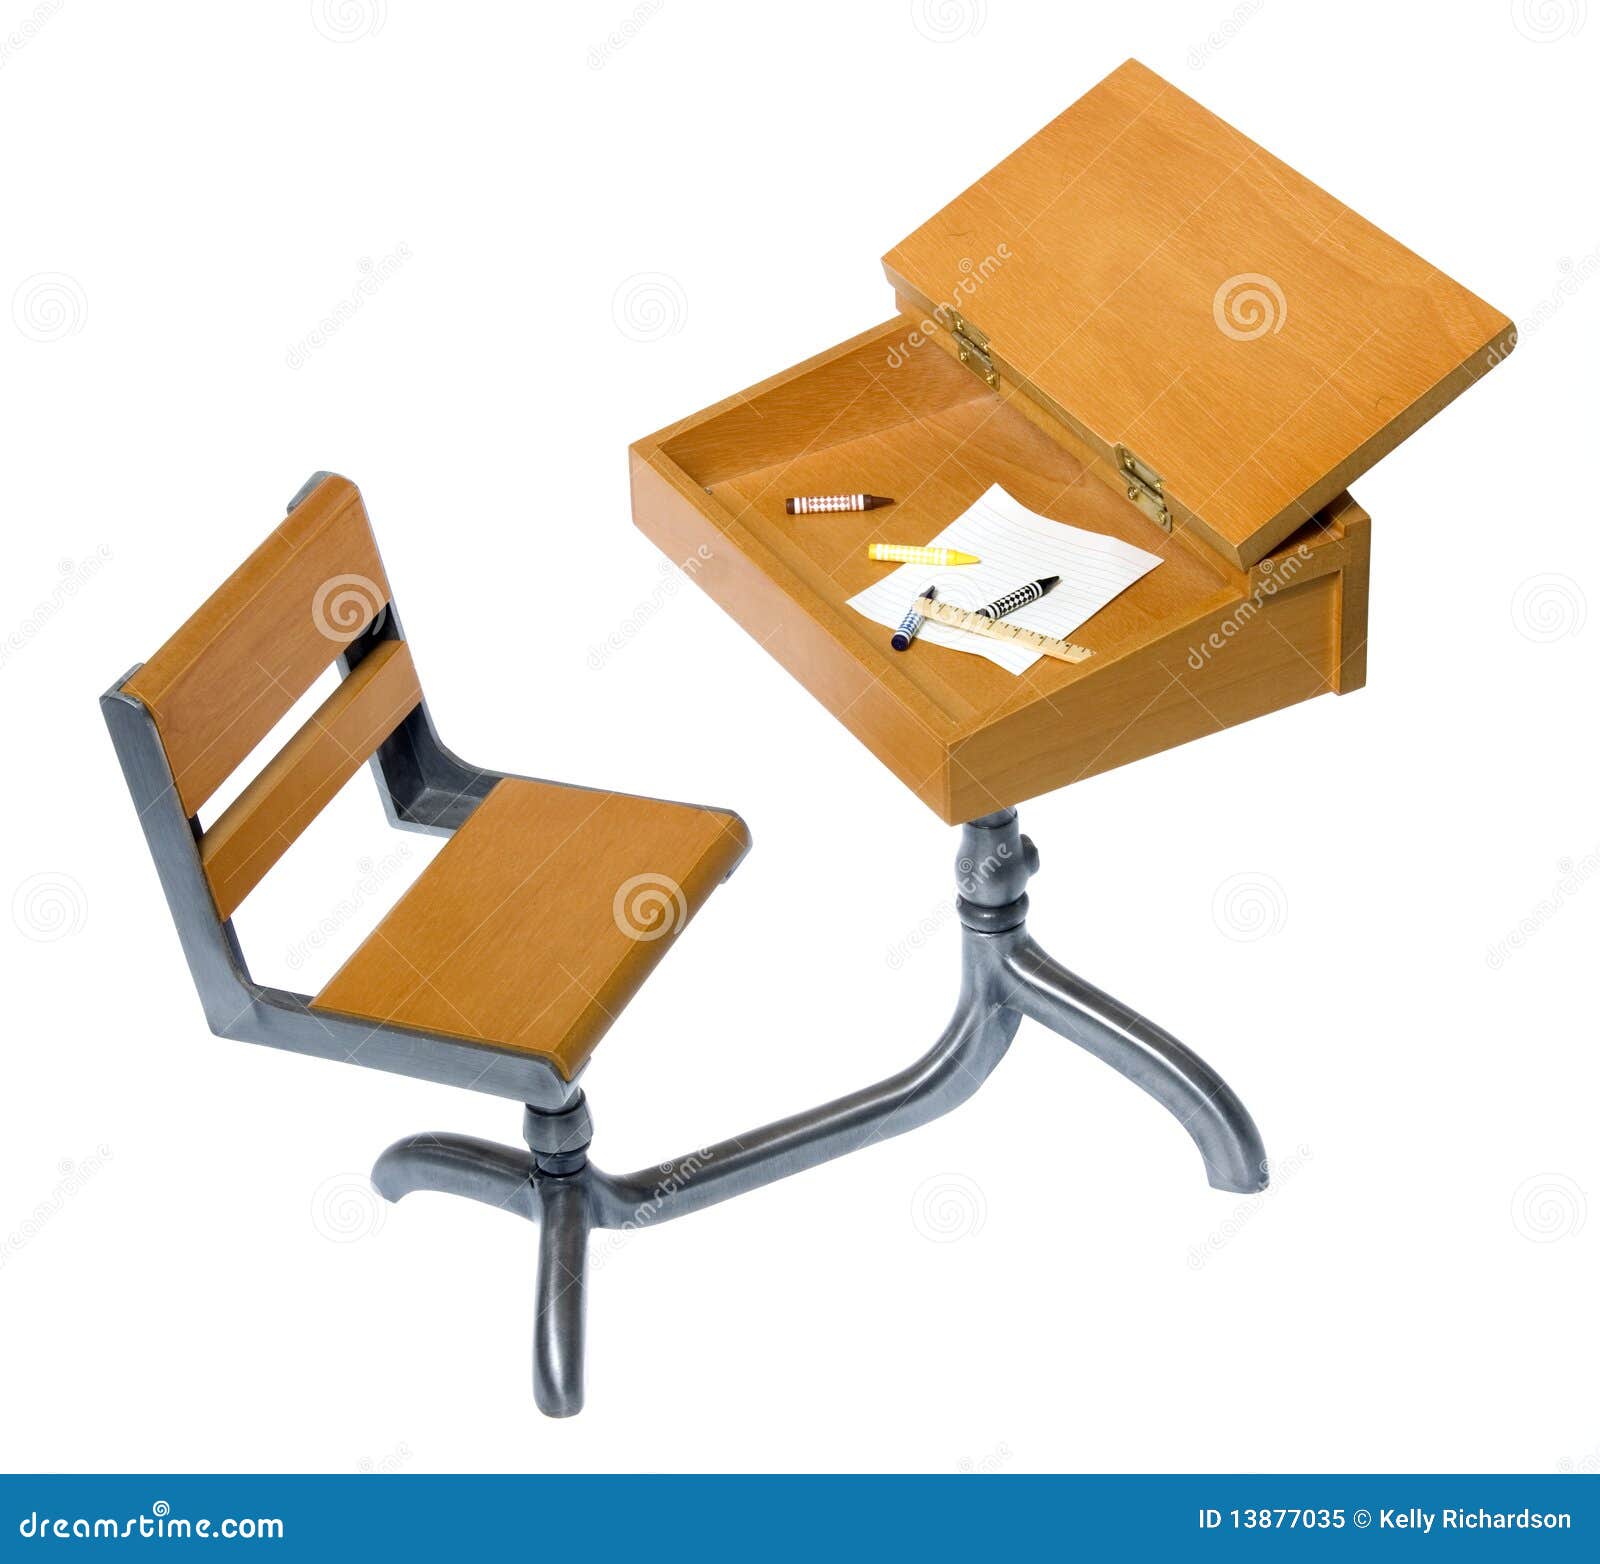 Antique School Desk With Writing Materials Inside Stock Image